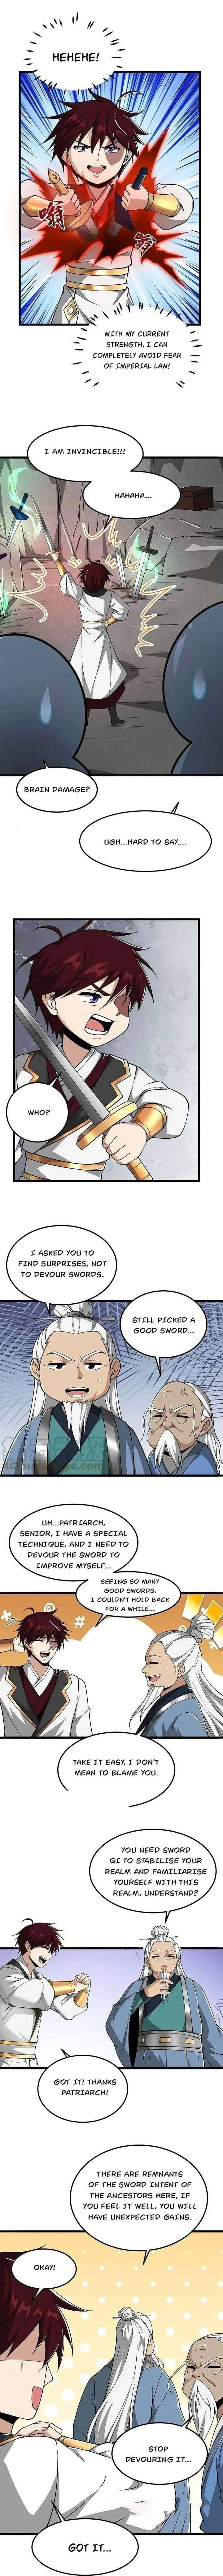 One Sword Reigns Supreme Chapter 321 Page 2